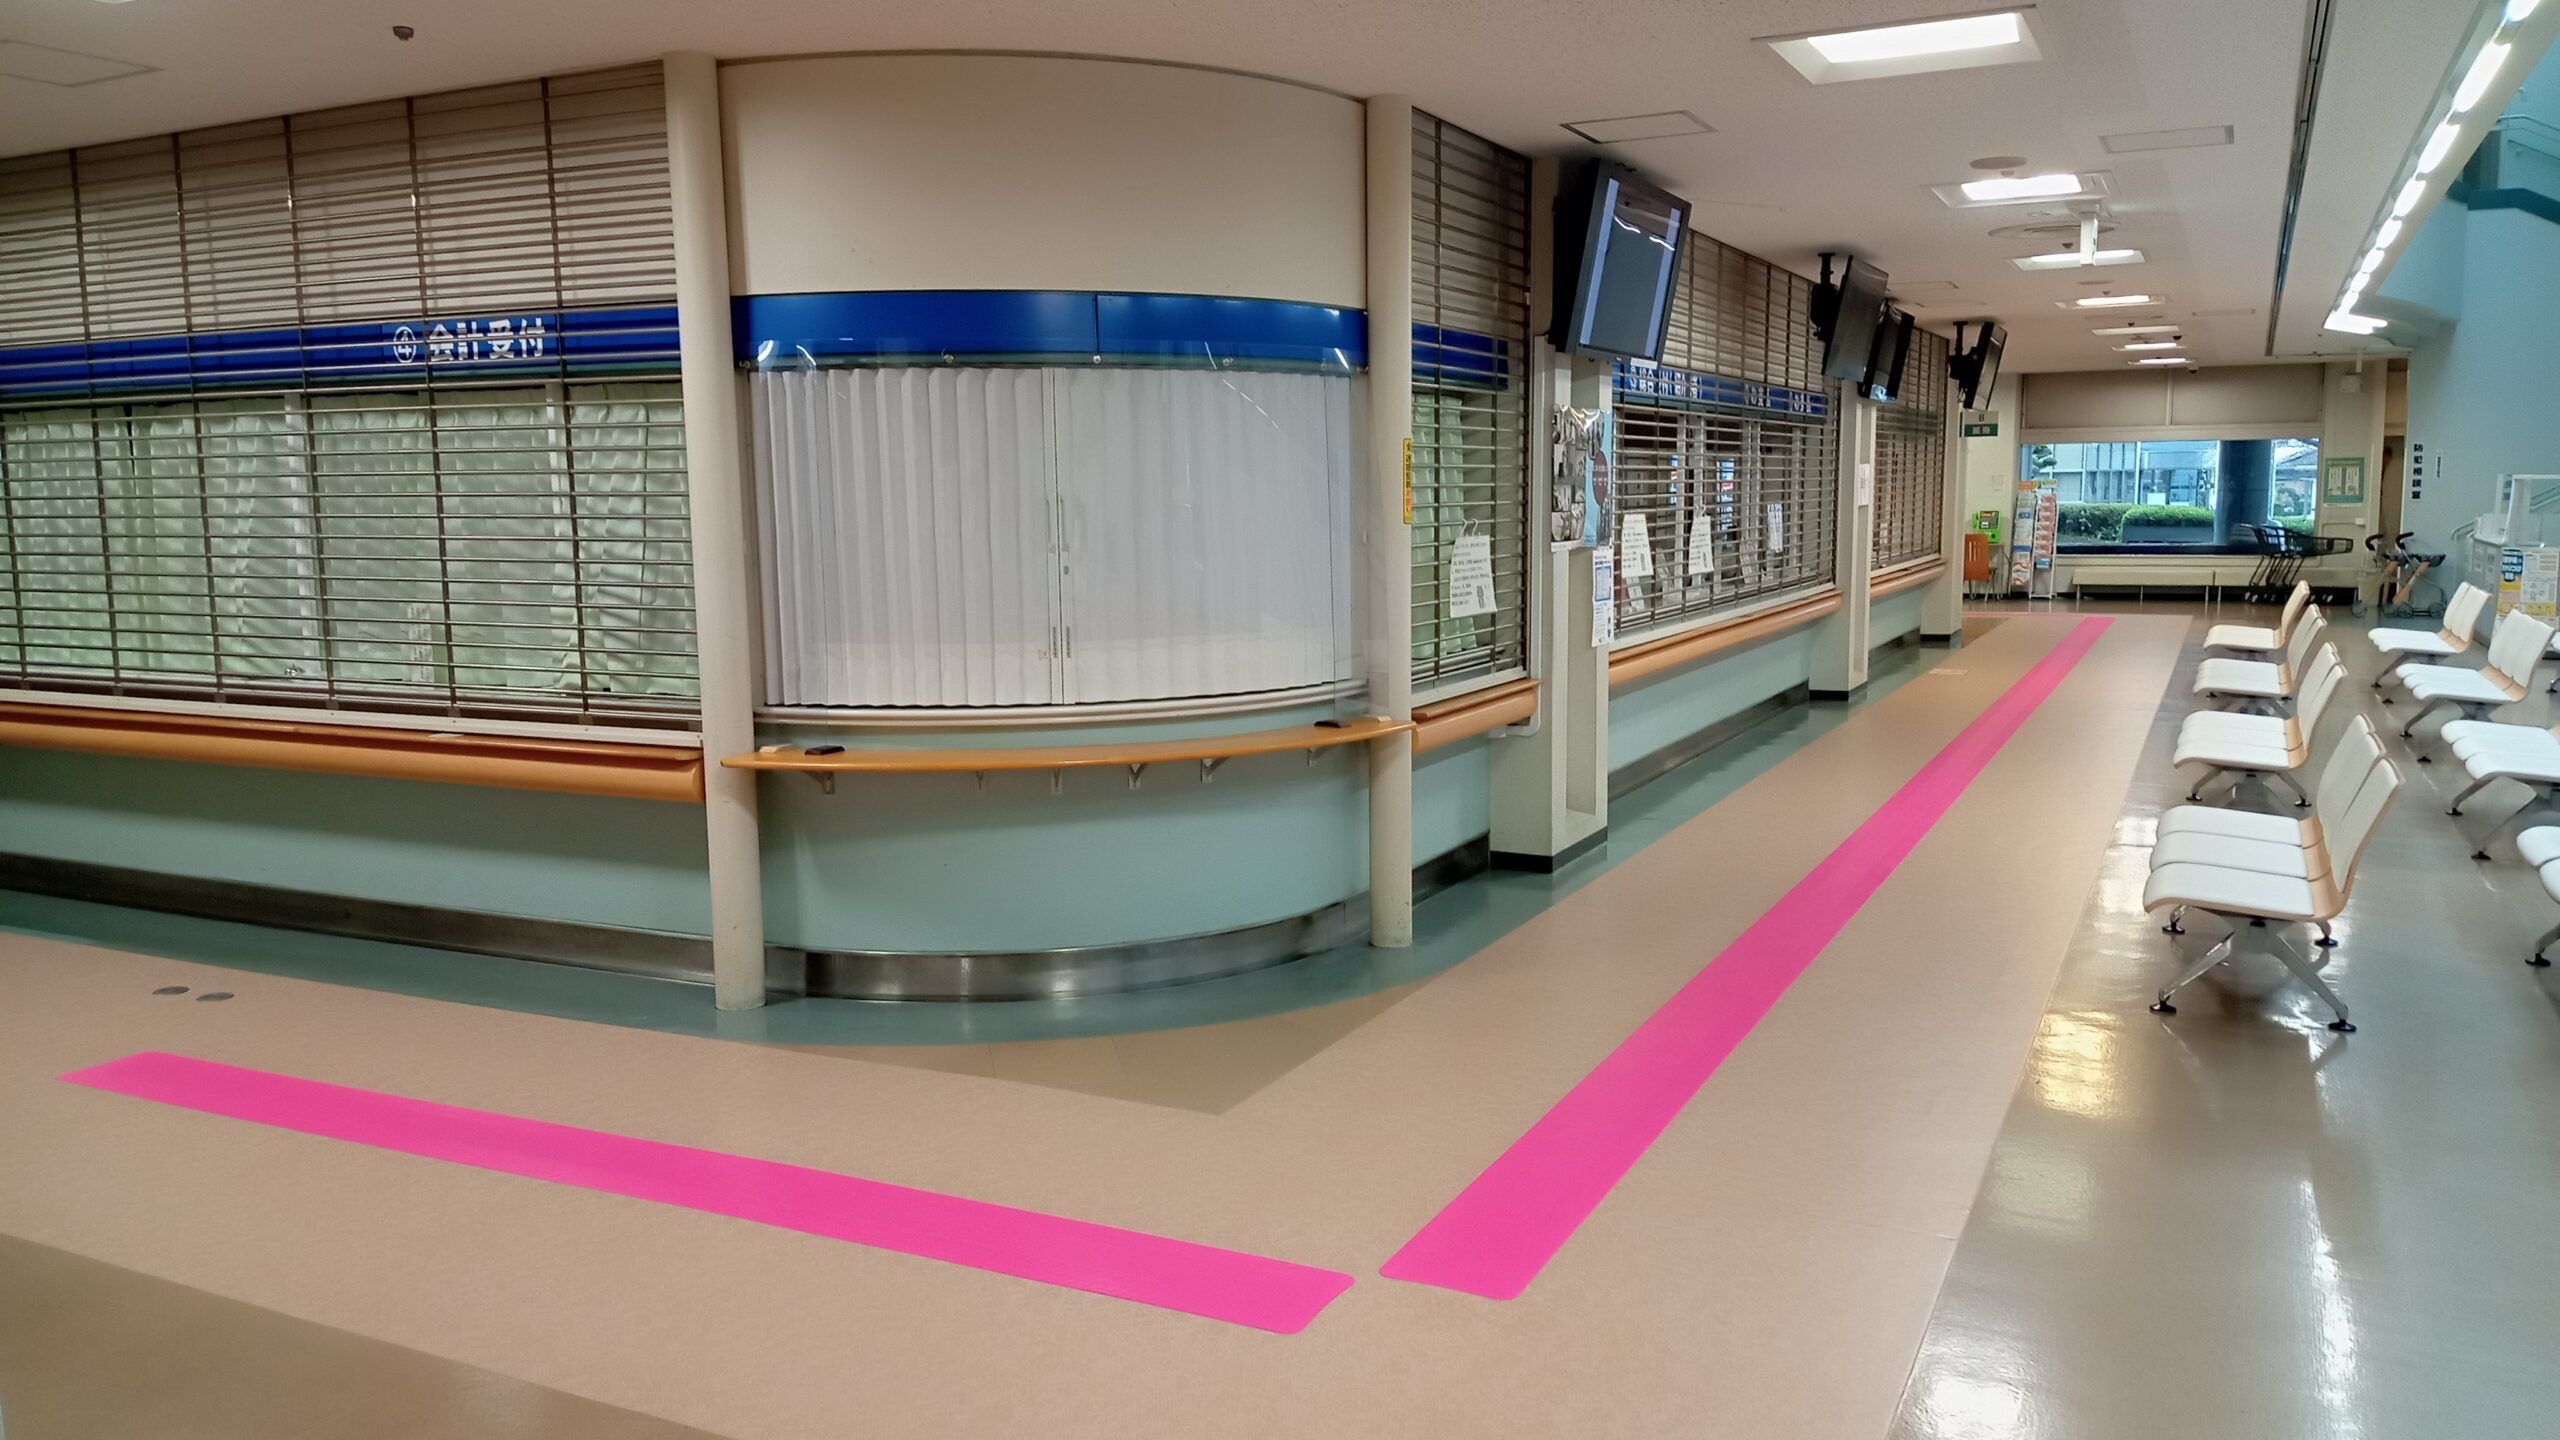 A pink hodokun has been installed in the middle of the corridor to guide people from the hospital entrance to the accounting counter.